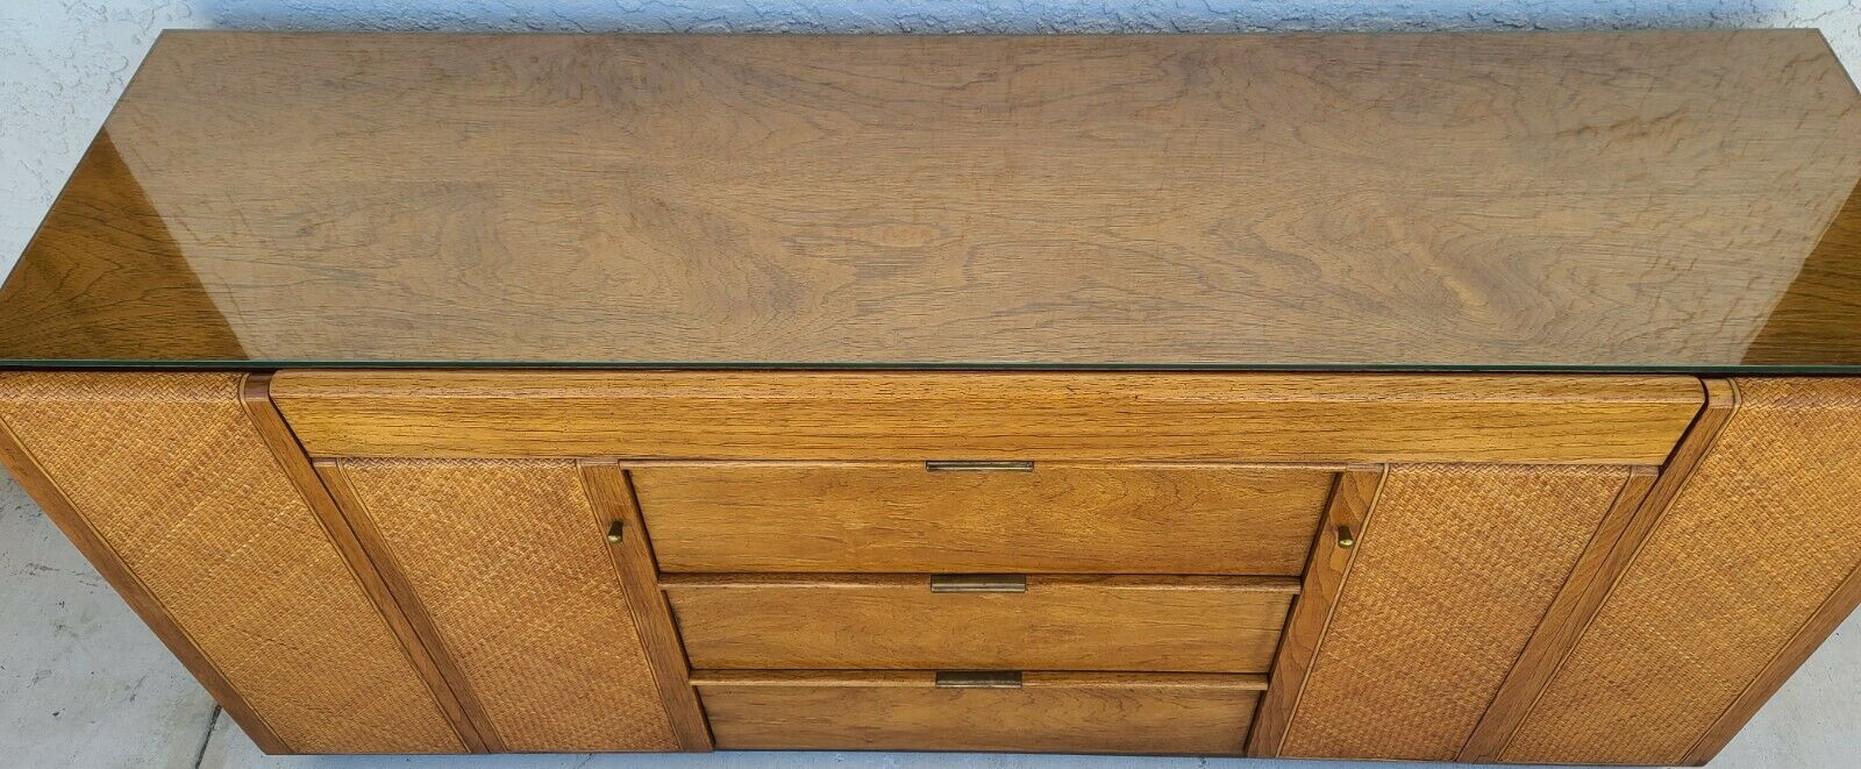 Wicker Mcm Dresser Credenza with Glass Top & Mirror by Founders For Sale